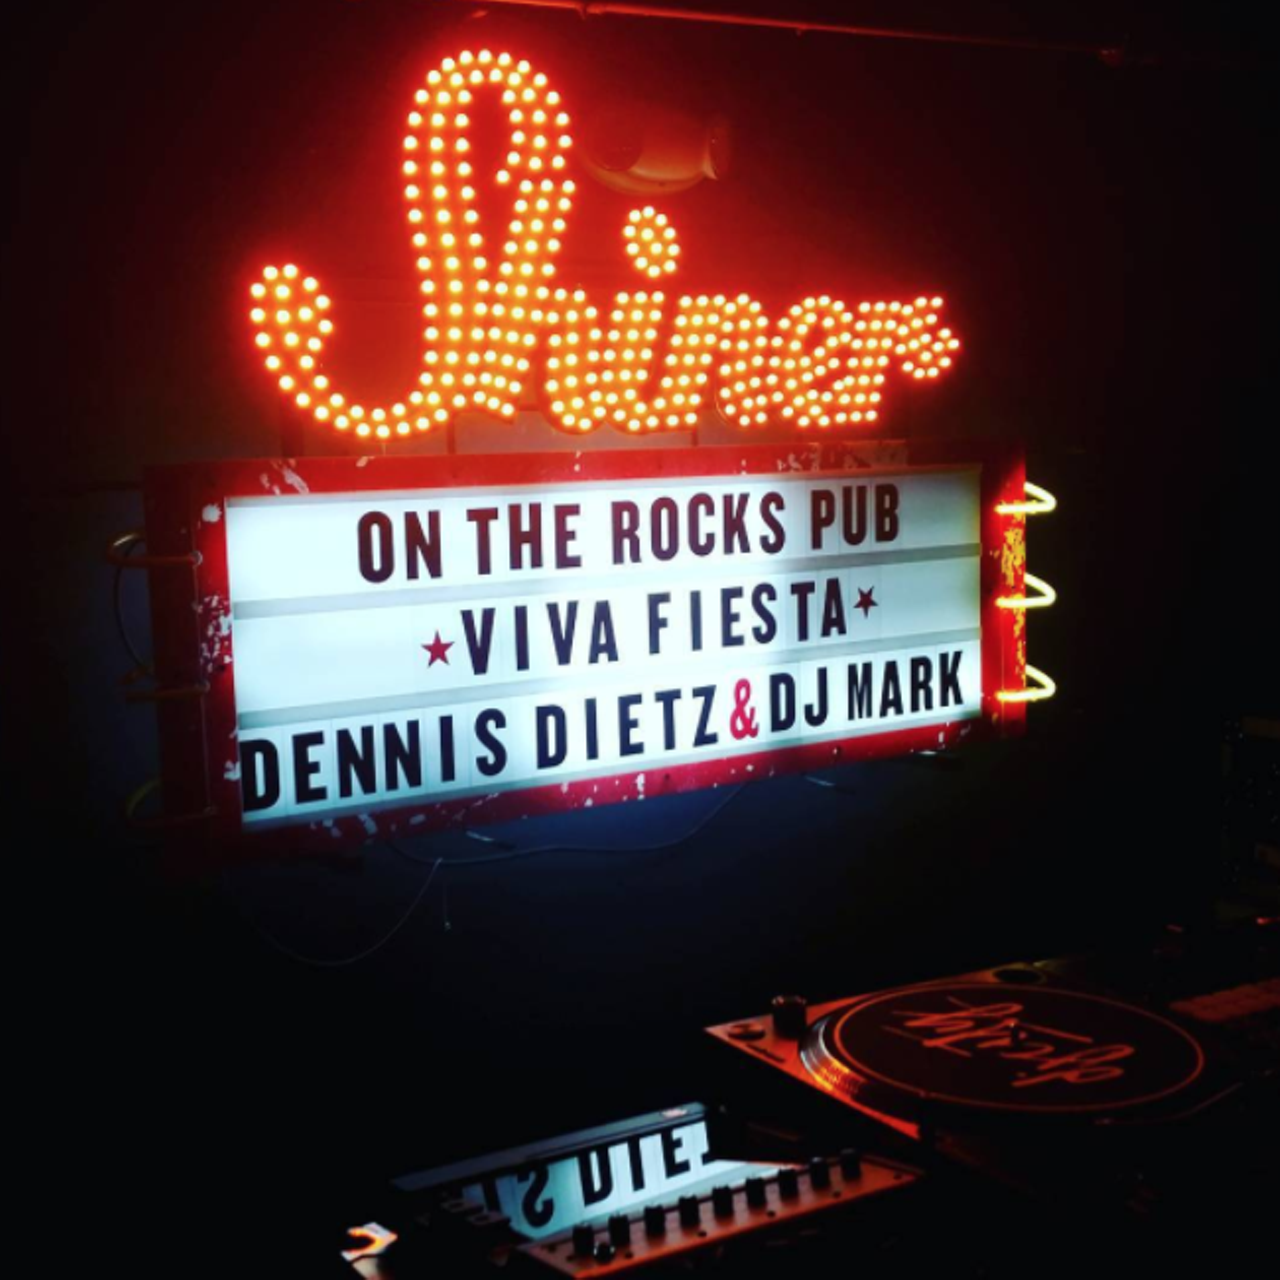 On the Rocks Pub
270 Losoya St., (210) 228-0000, ontherocks.pub
The shots menu here is unbeatable, and with live music, you'll become a "woo" girl before you know it.
Photo via Instagram, rubixcube1382